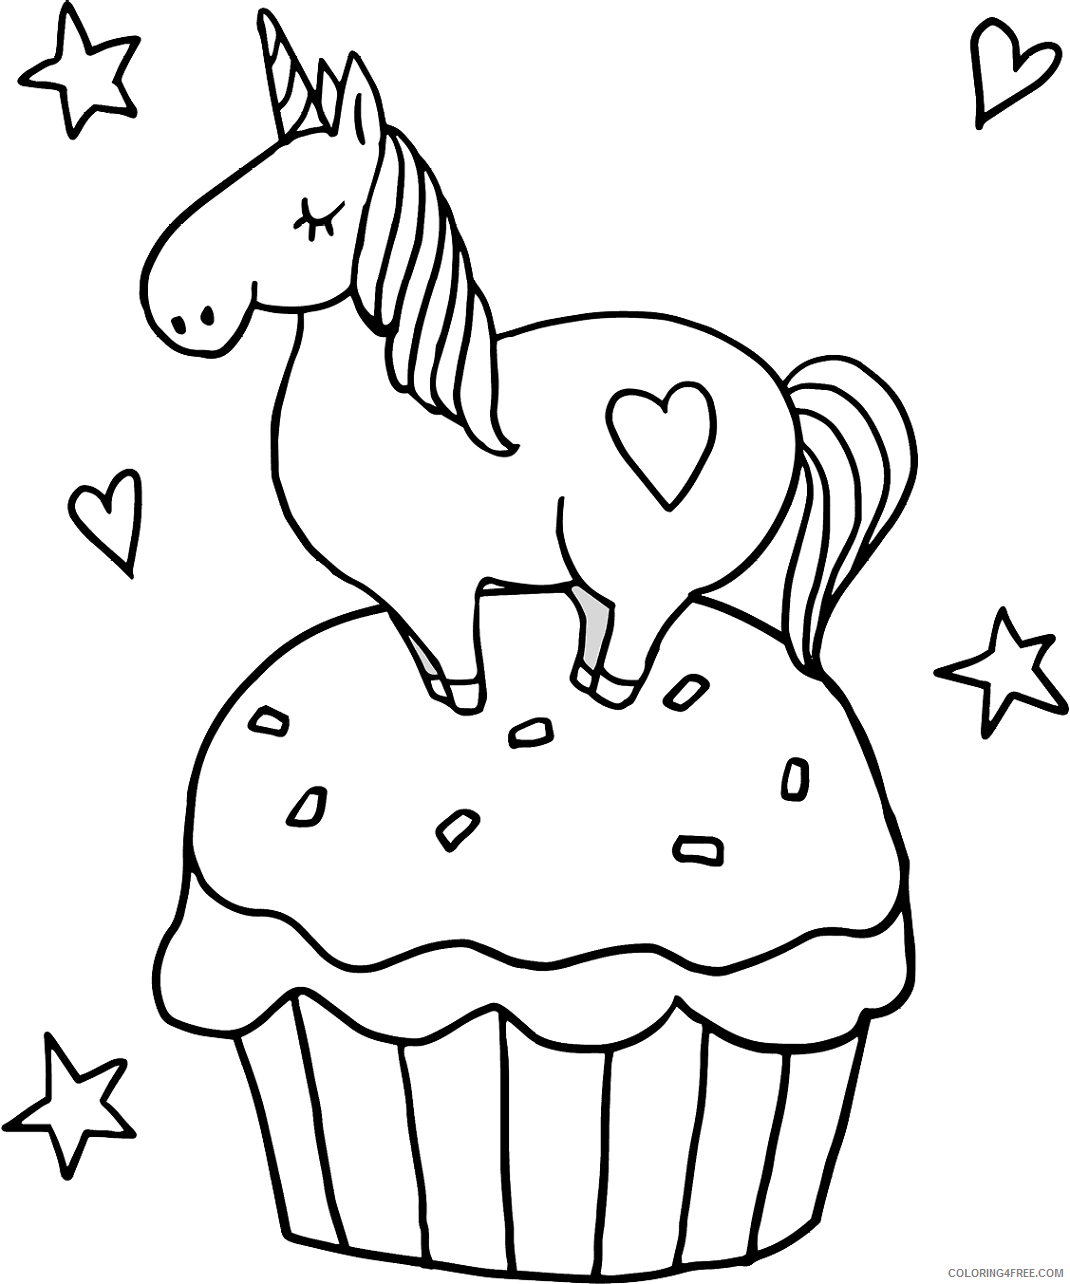 Unicorn Coloring Pages little_unicorn_on_cupcake Printable 2021 6043 Coloring4free